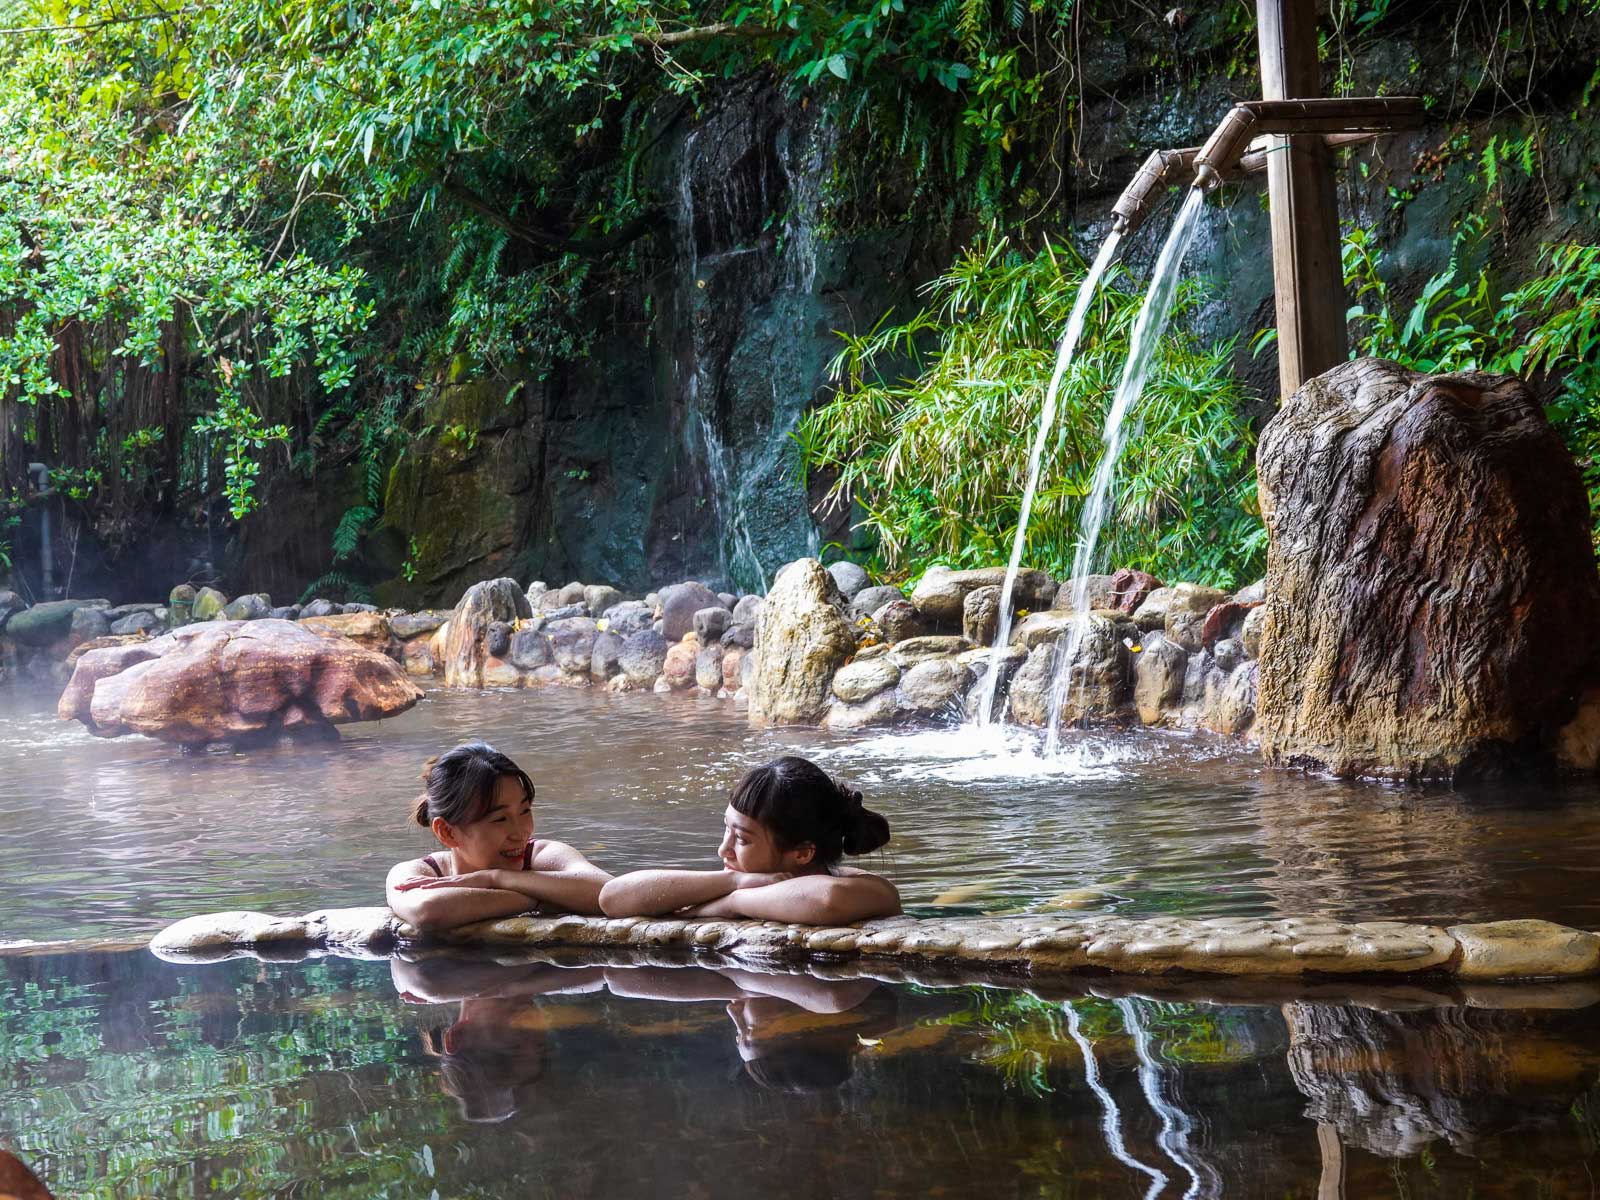 Bathers enjoy a natural-looking hot spring pool made with cement, rocks, and bamboo